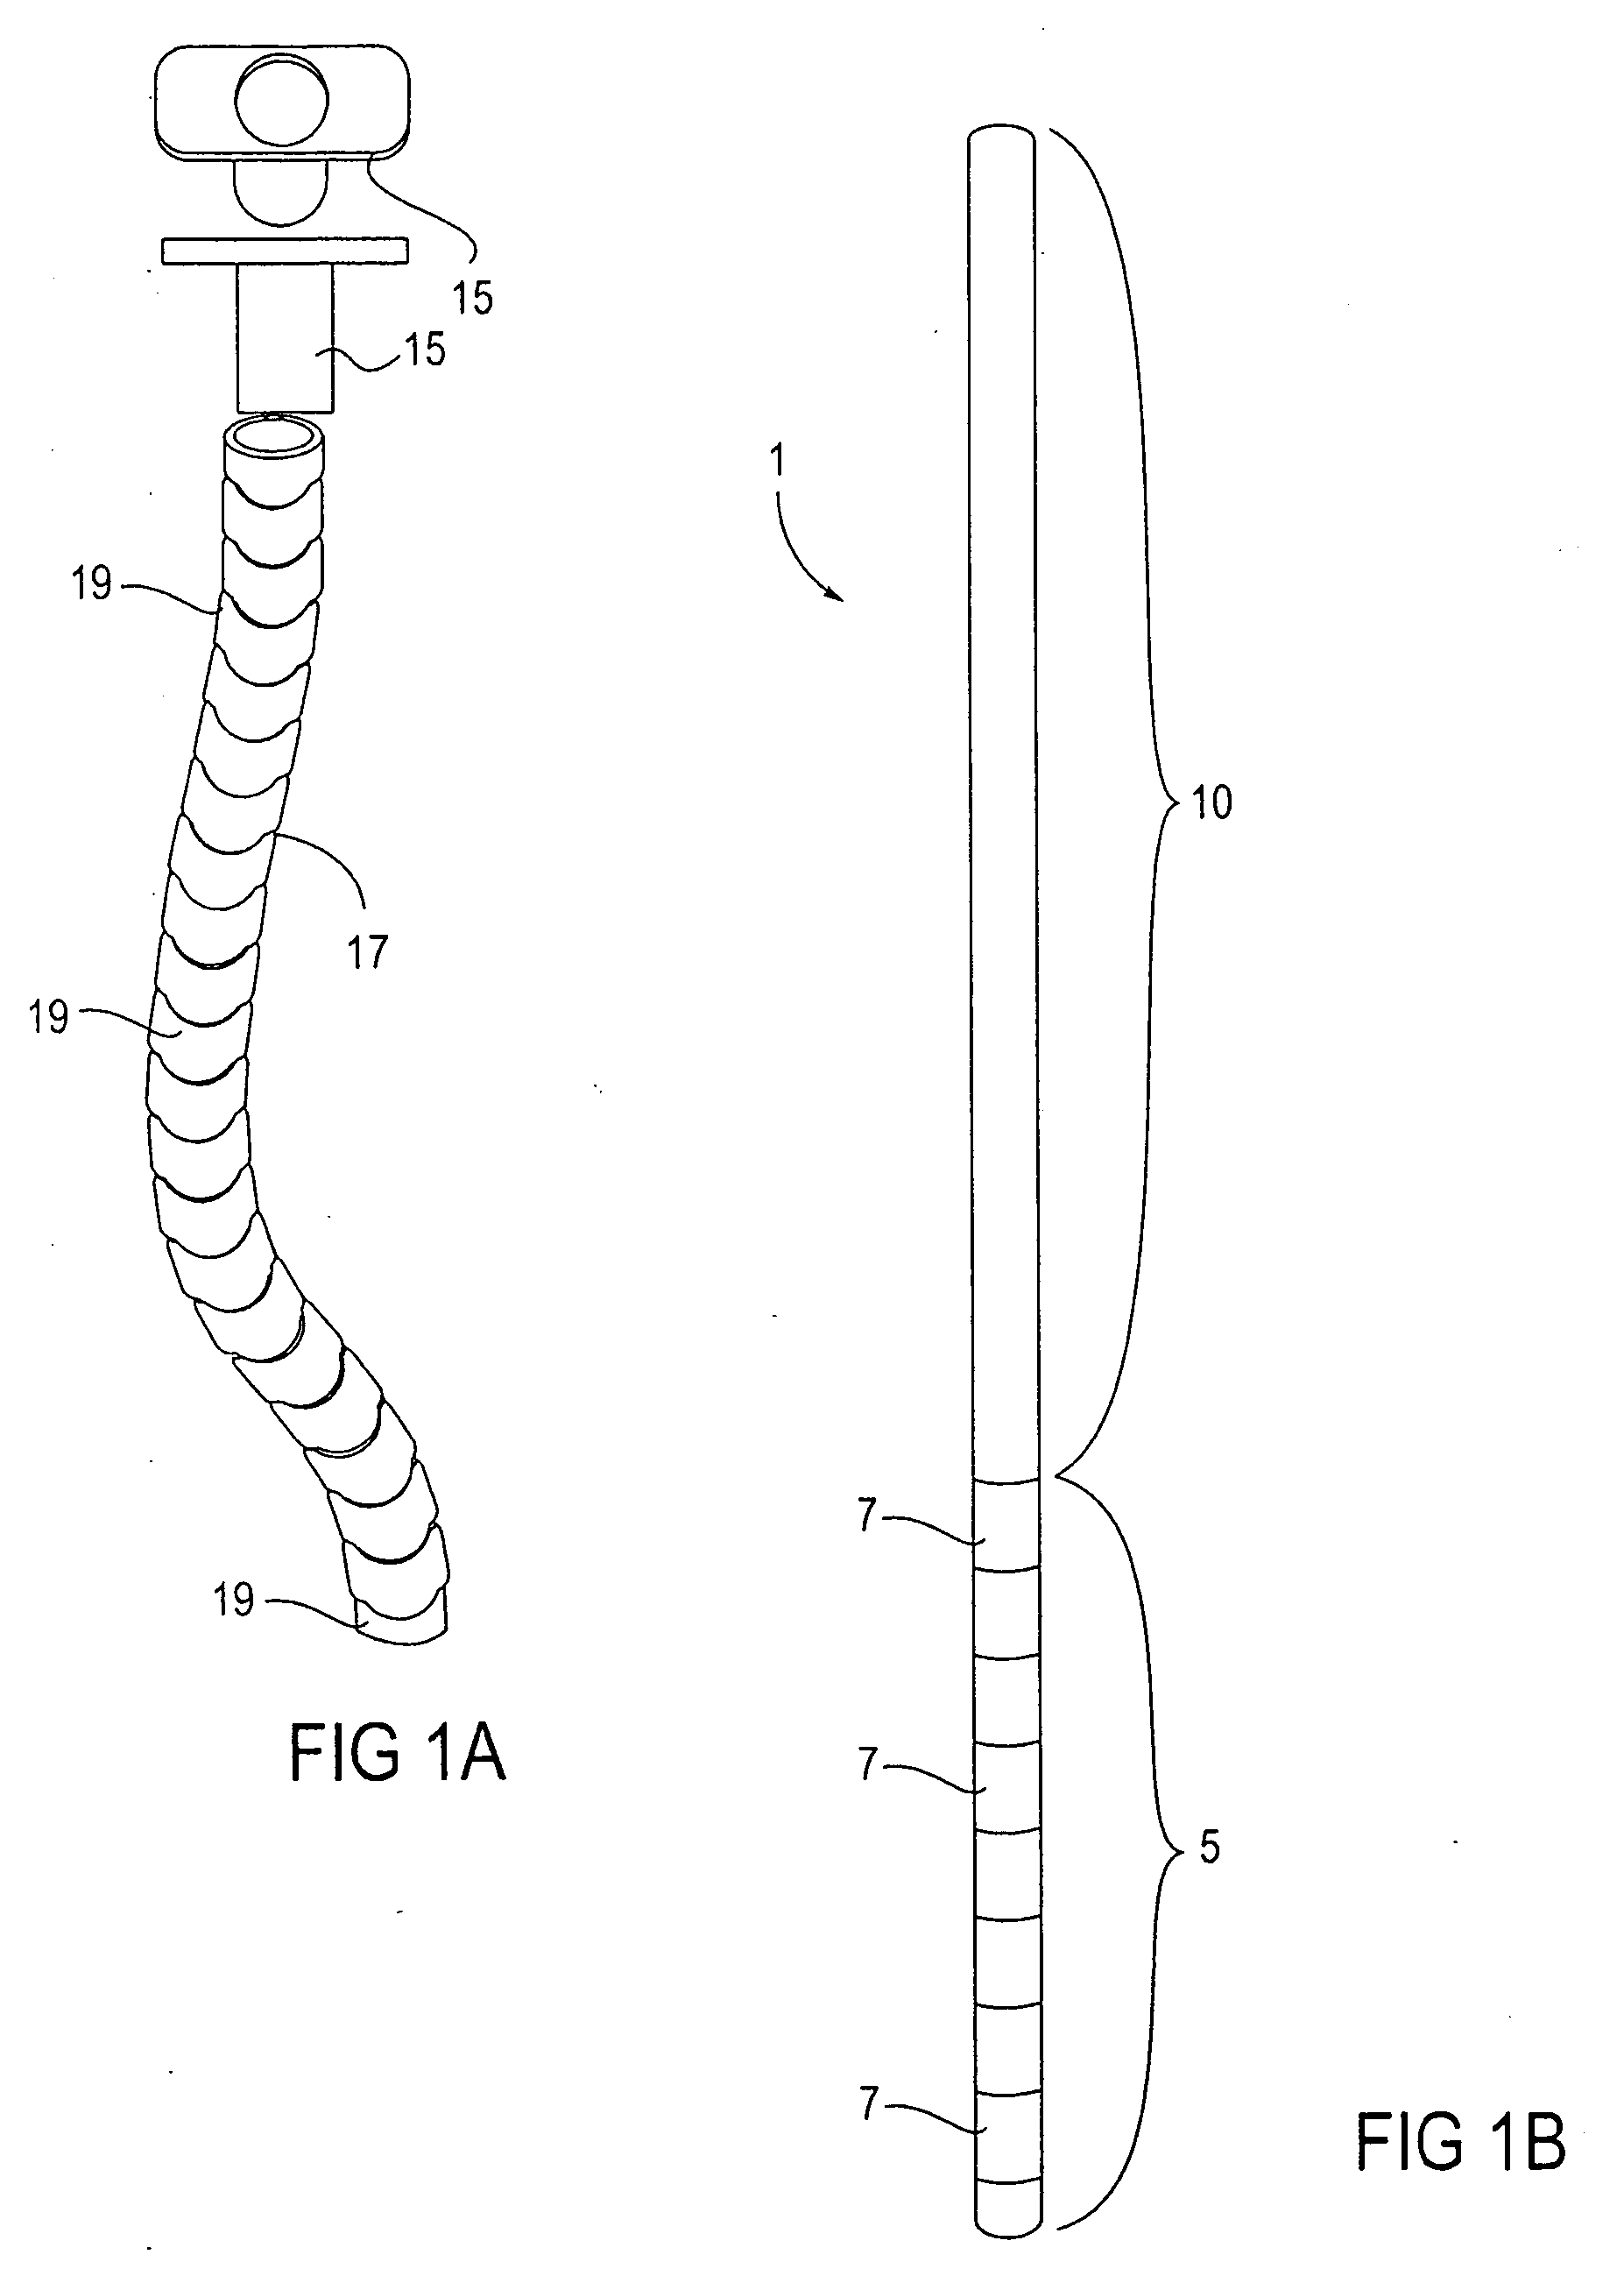 Methods and apparatus for performing transluminal and other procedures